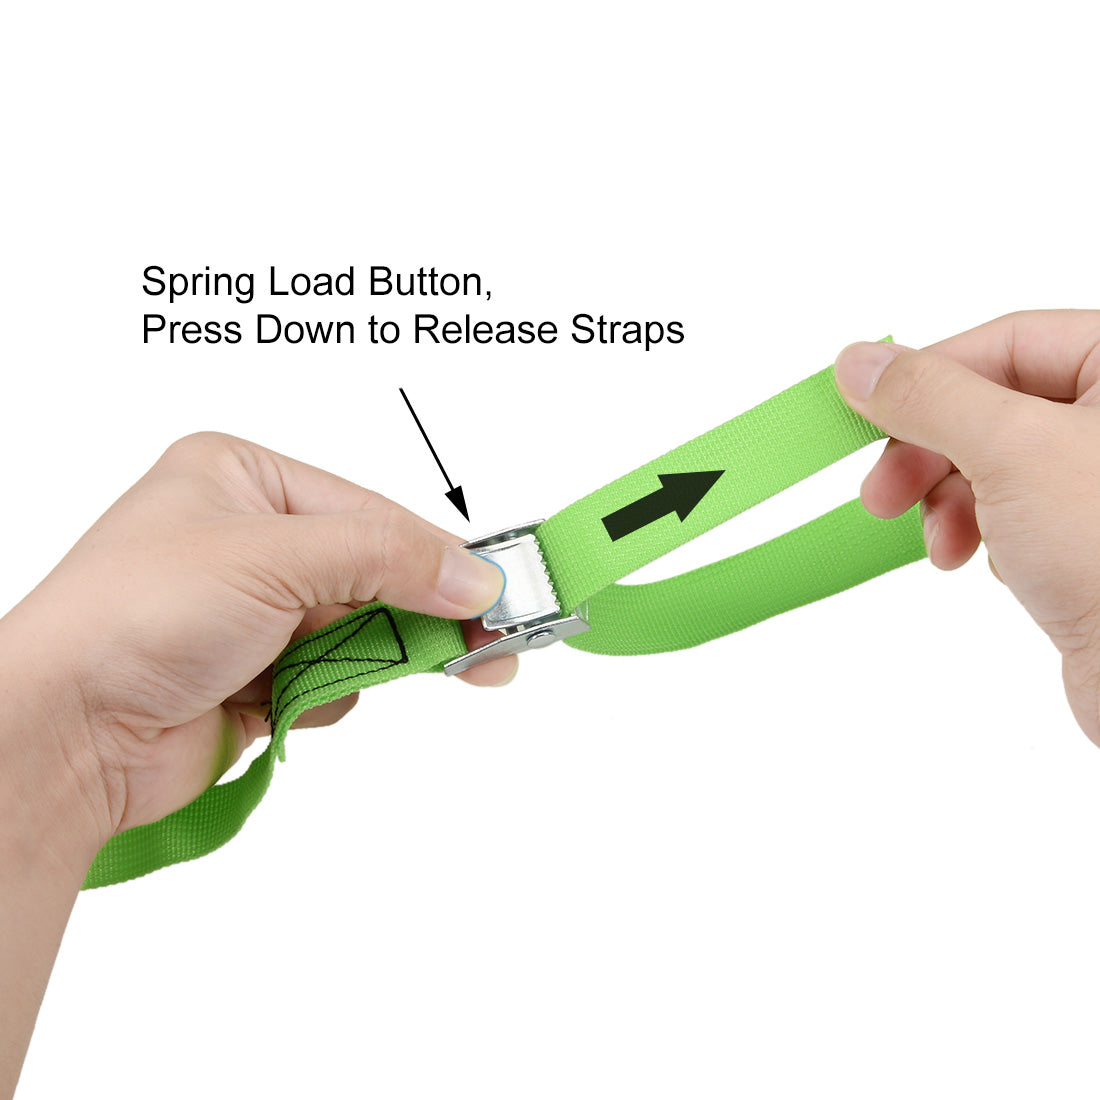 uxcell Uxcell Lashing Strap 1" x 1.6' Cargo Tie Down Straps with Cam Lock Buckle Up to 551lbs Green 4pcs